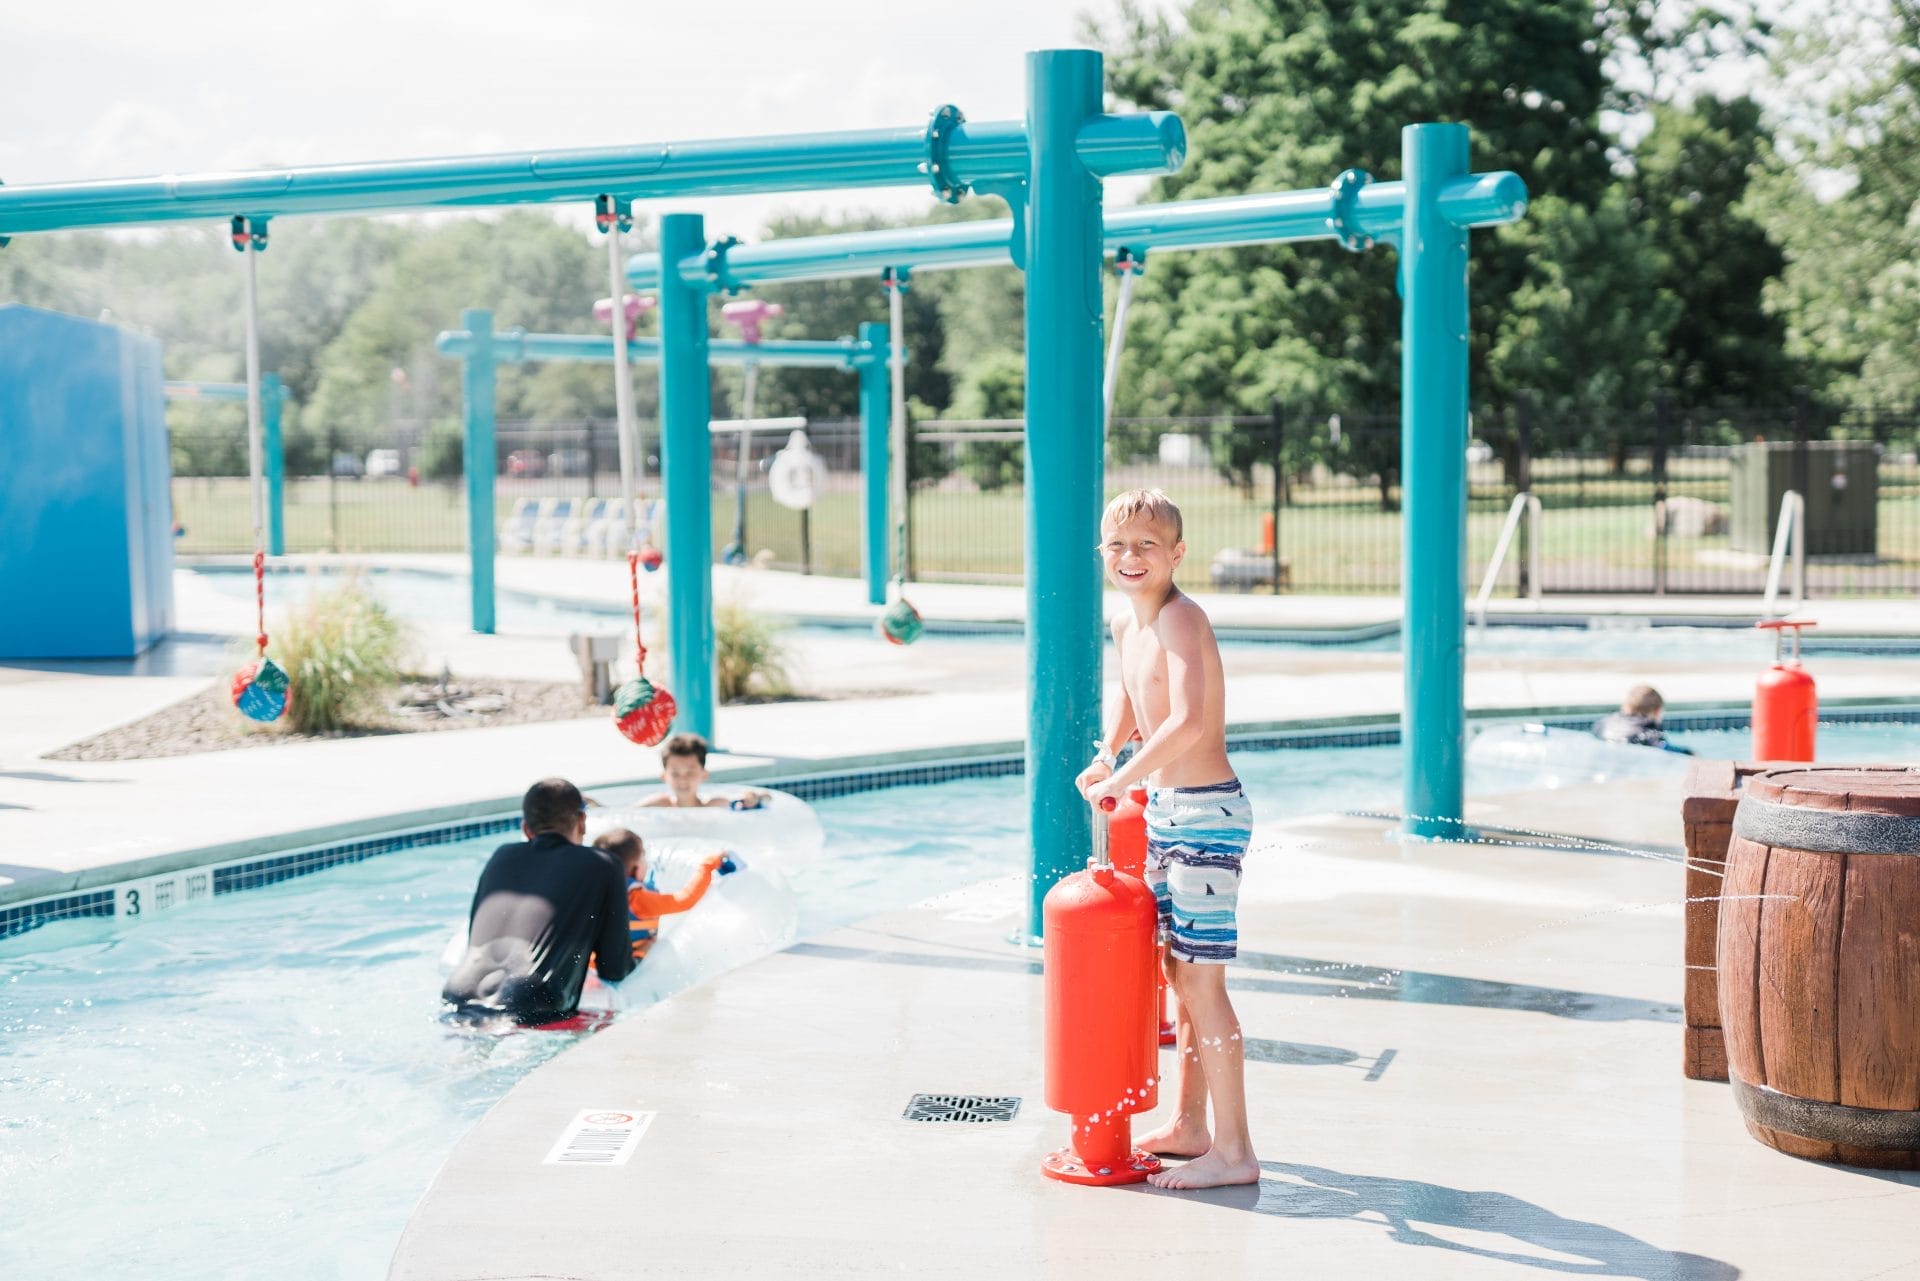 A boy playing with an Interactive Play thump pump next to a lazy river